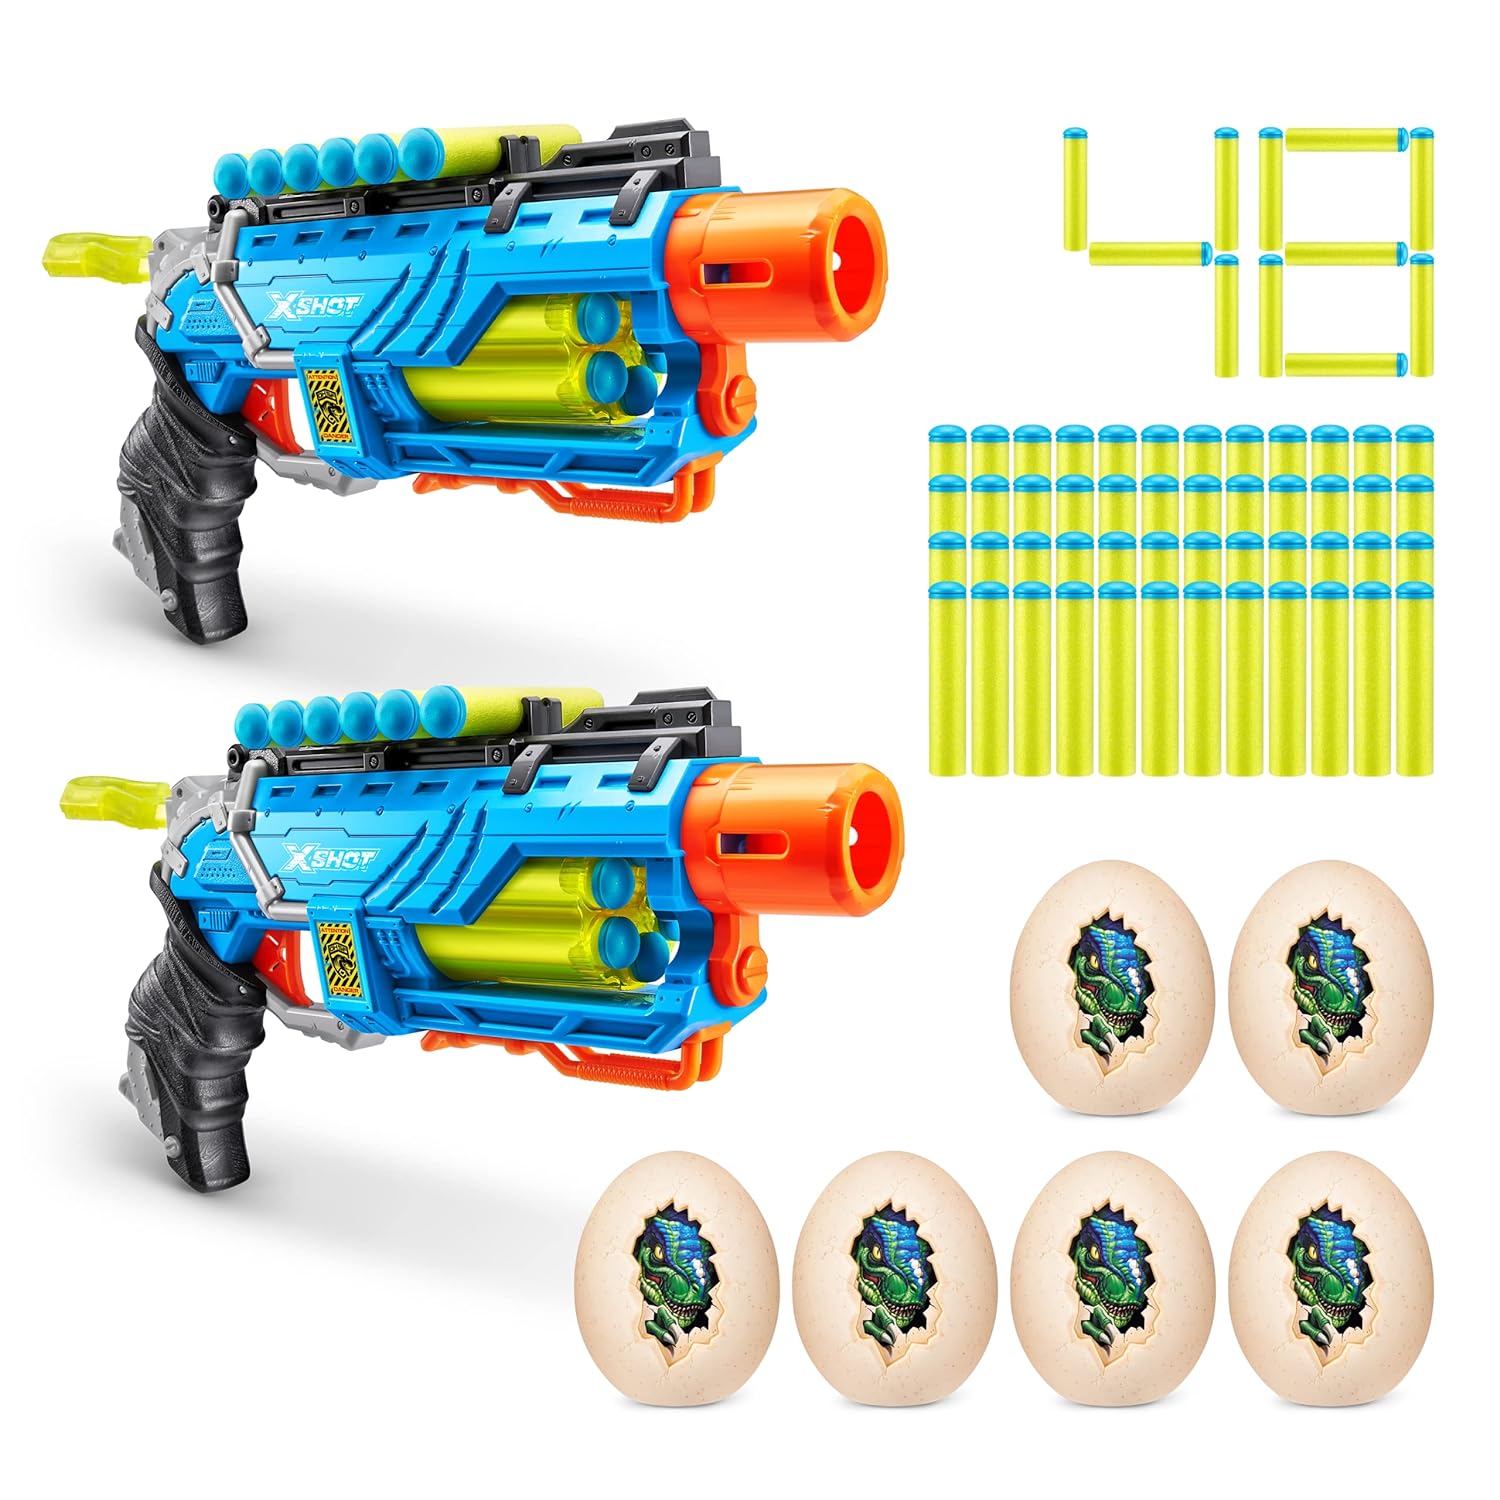 X-Shot Water Guns are the only thing you need to bring to your pool party